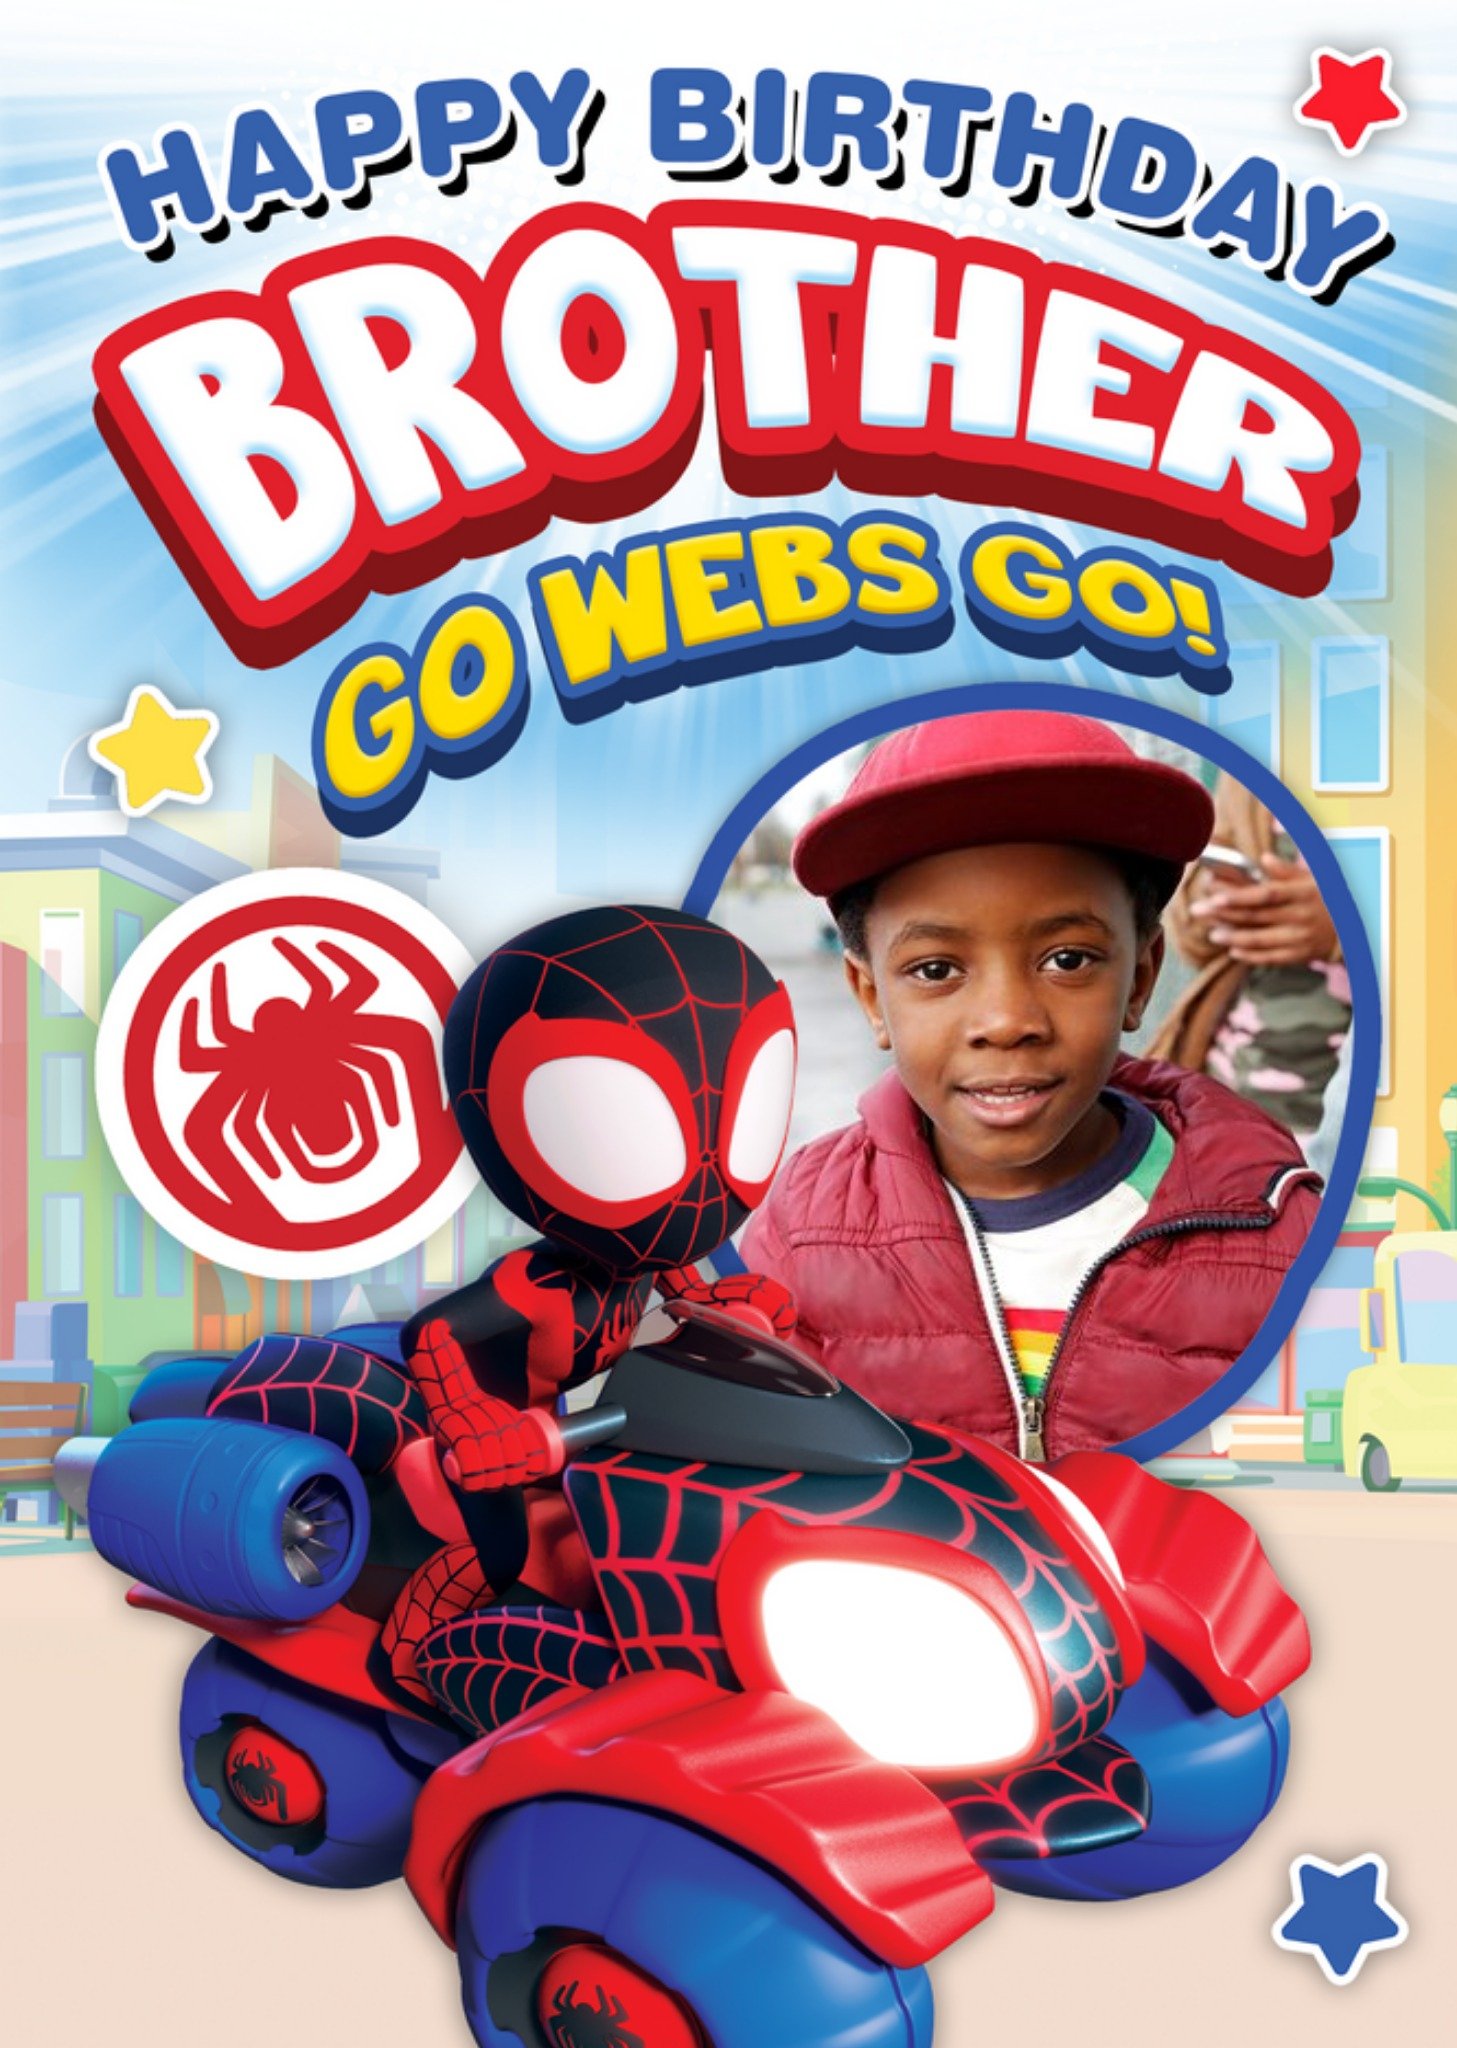 Disney Spidey And Amazing Friends Brother Go Webs Go Photo Upload Birthday Card, Large